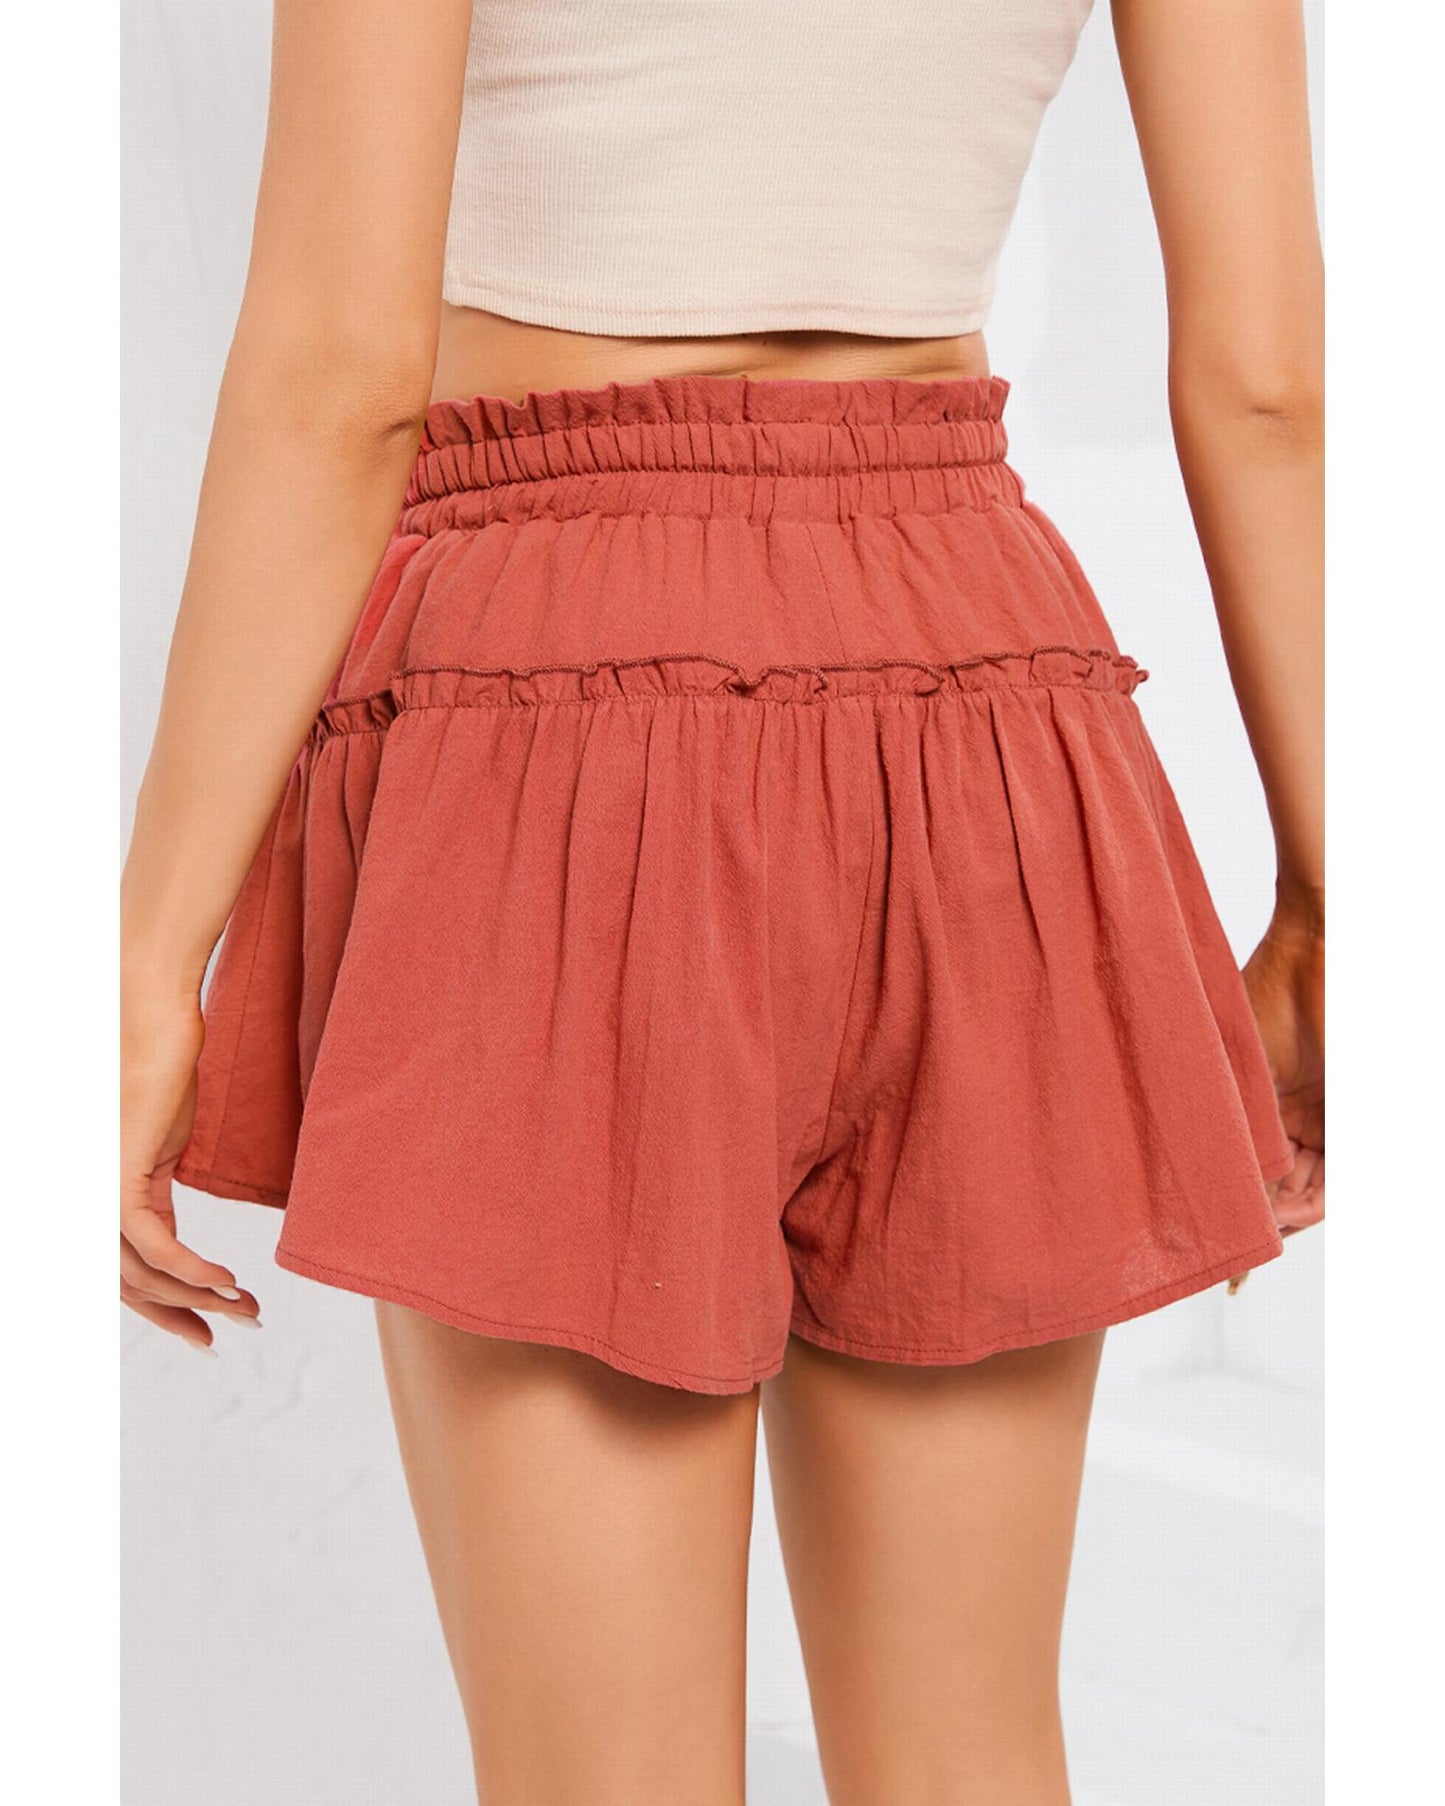 Azura Exchange Belted Frill Trim Casual Shorts - M